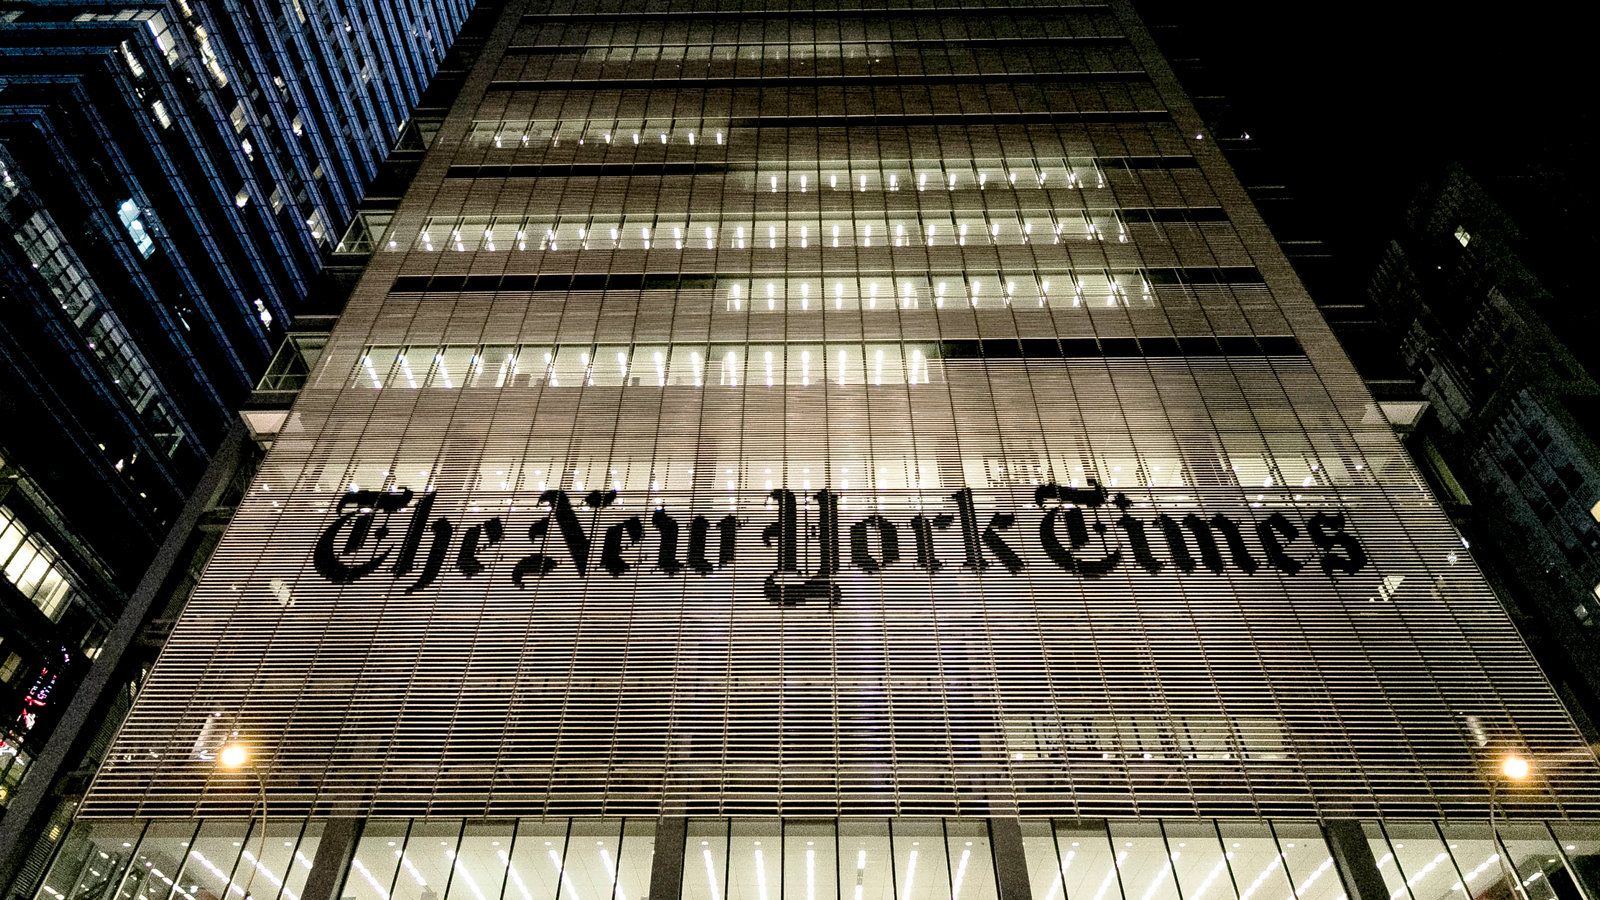 New York Times Regrets Pumping Bitcoin Price, Will Focus Future Effort On Starting War Instead